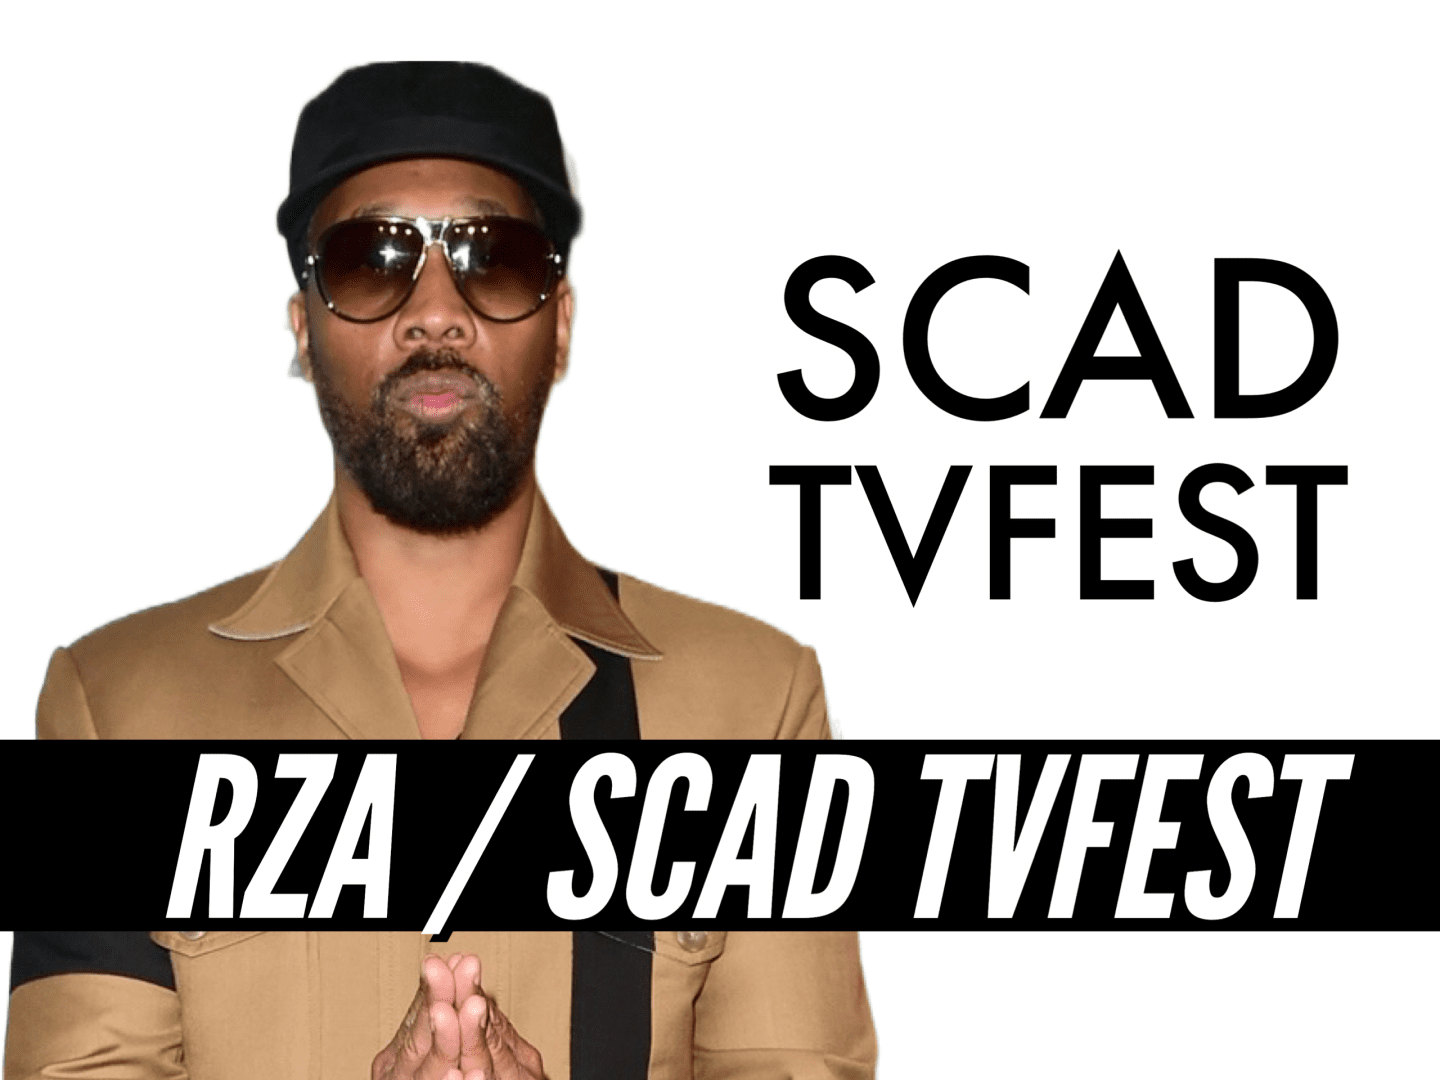 SCAD TV Fest celebrates its 11th year with exciting programing and